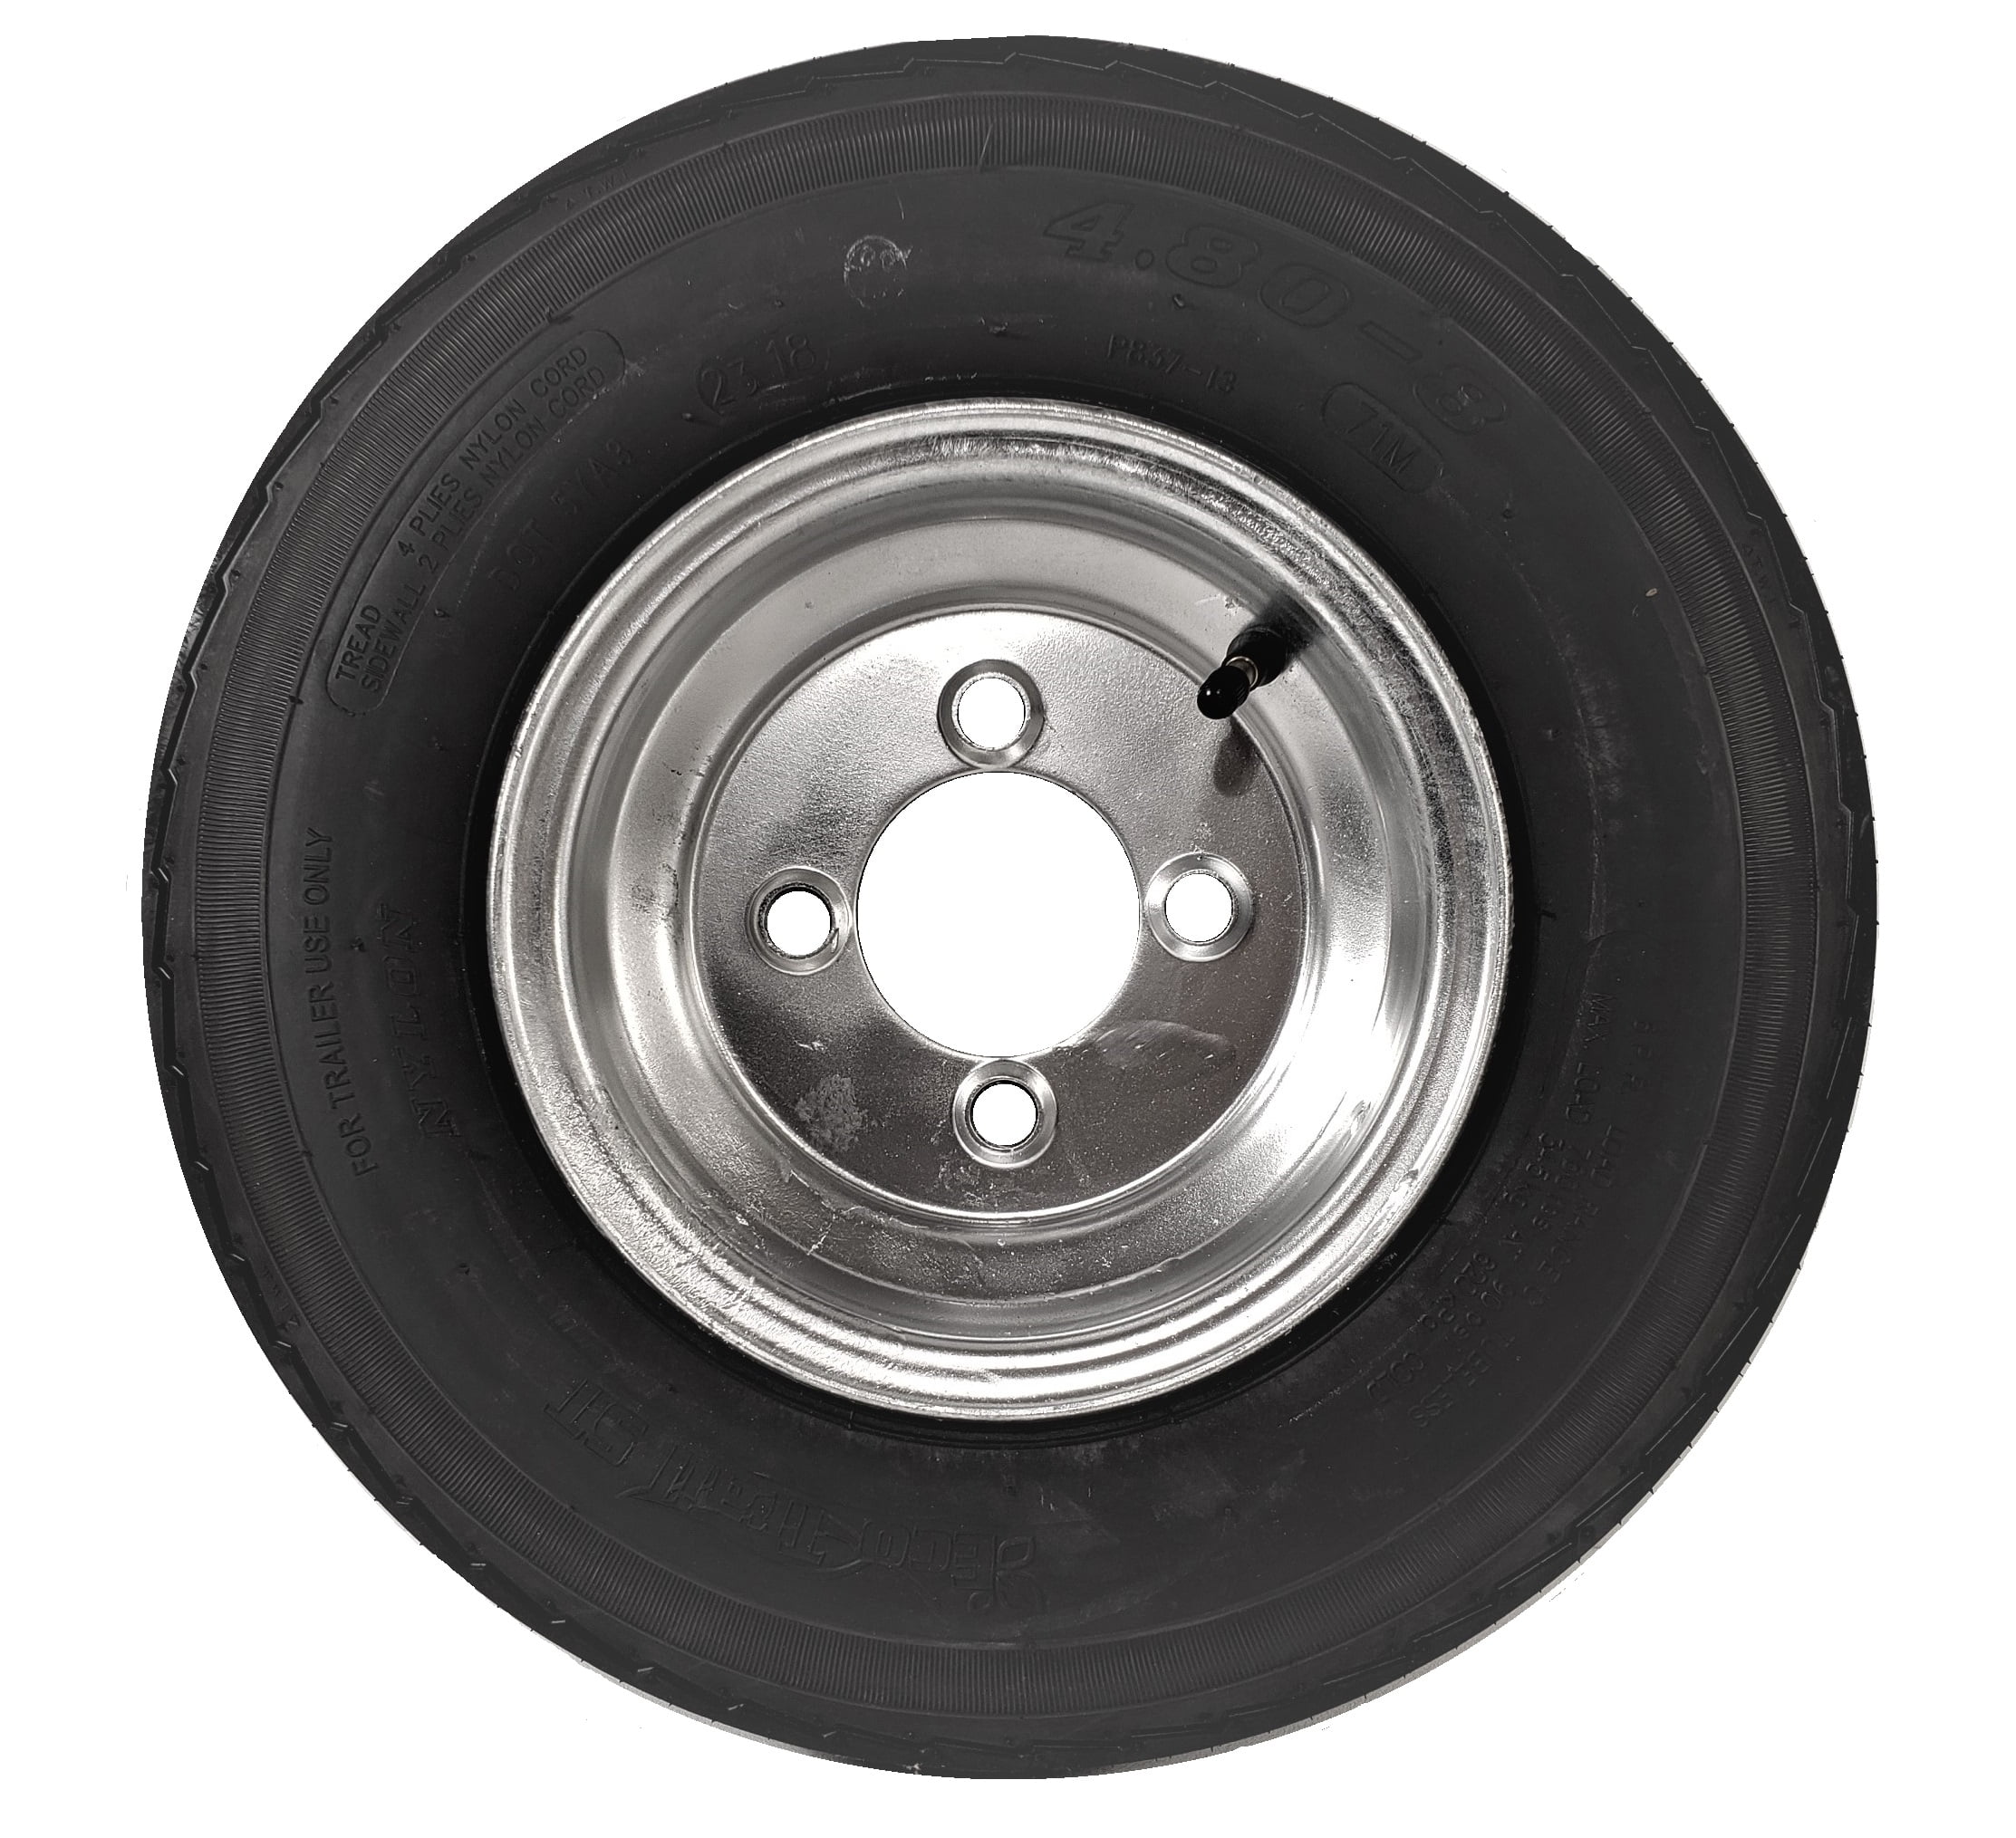 4 Lug On 4 in. 2-Pack Trailer Tire On White Rim 480-8 4.80-8 4.80 x 8 Load C 